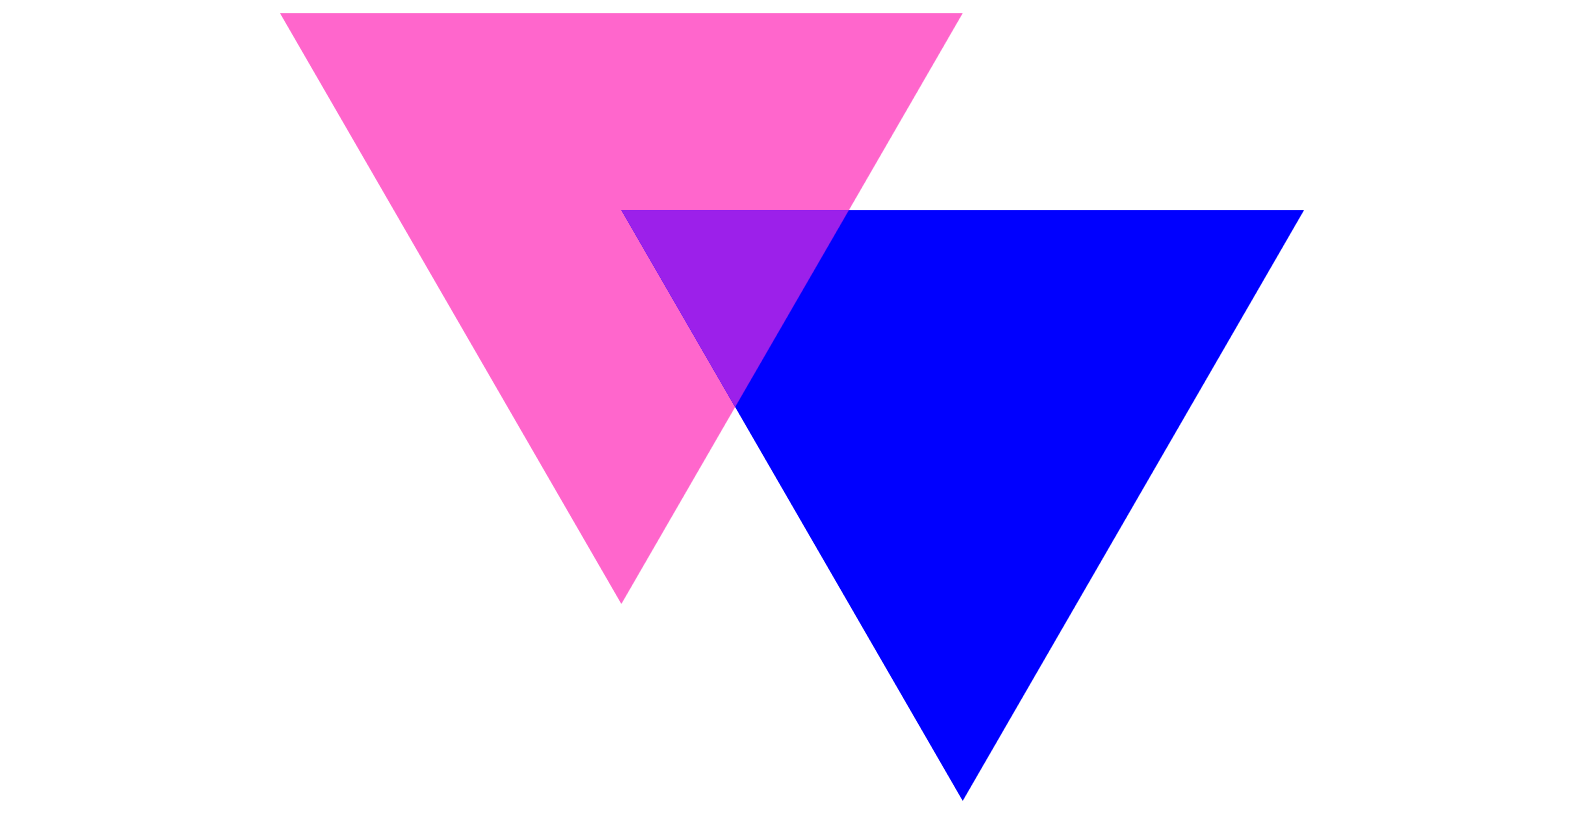 Two intersecting triangles in hot pink and royal blue.  